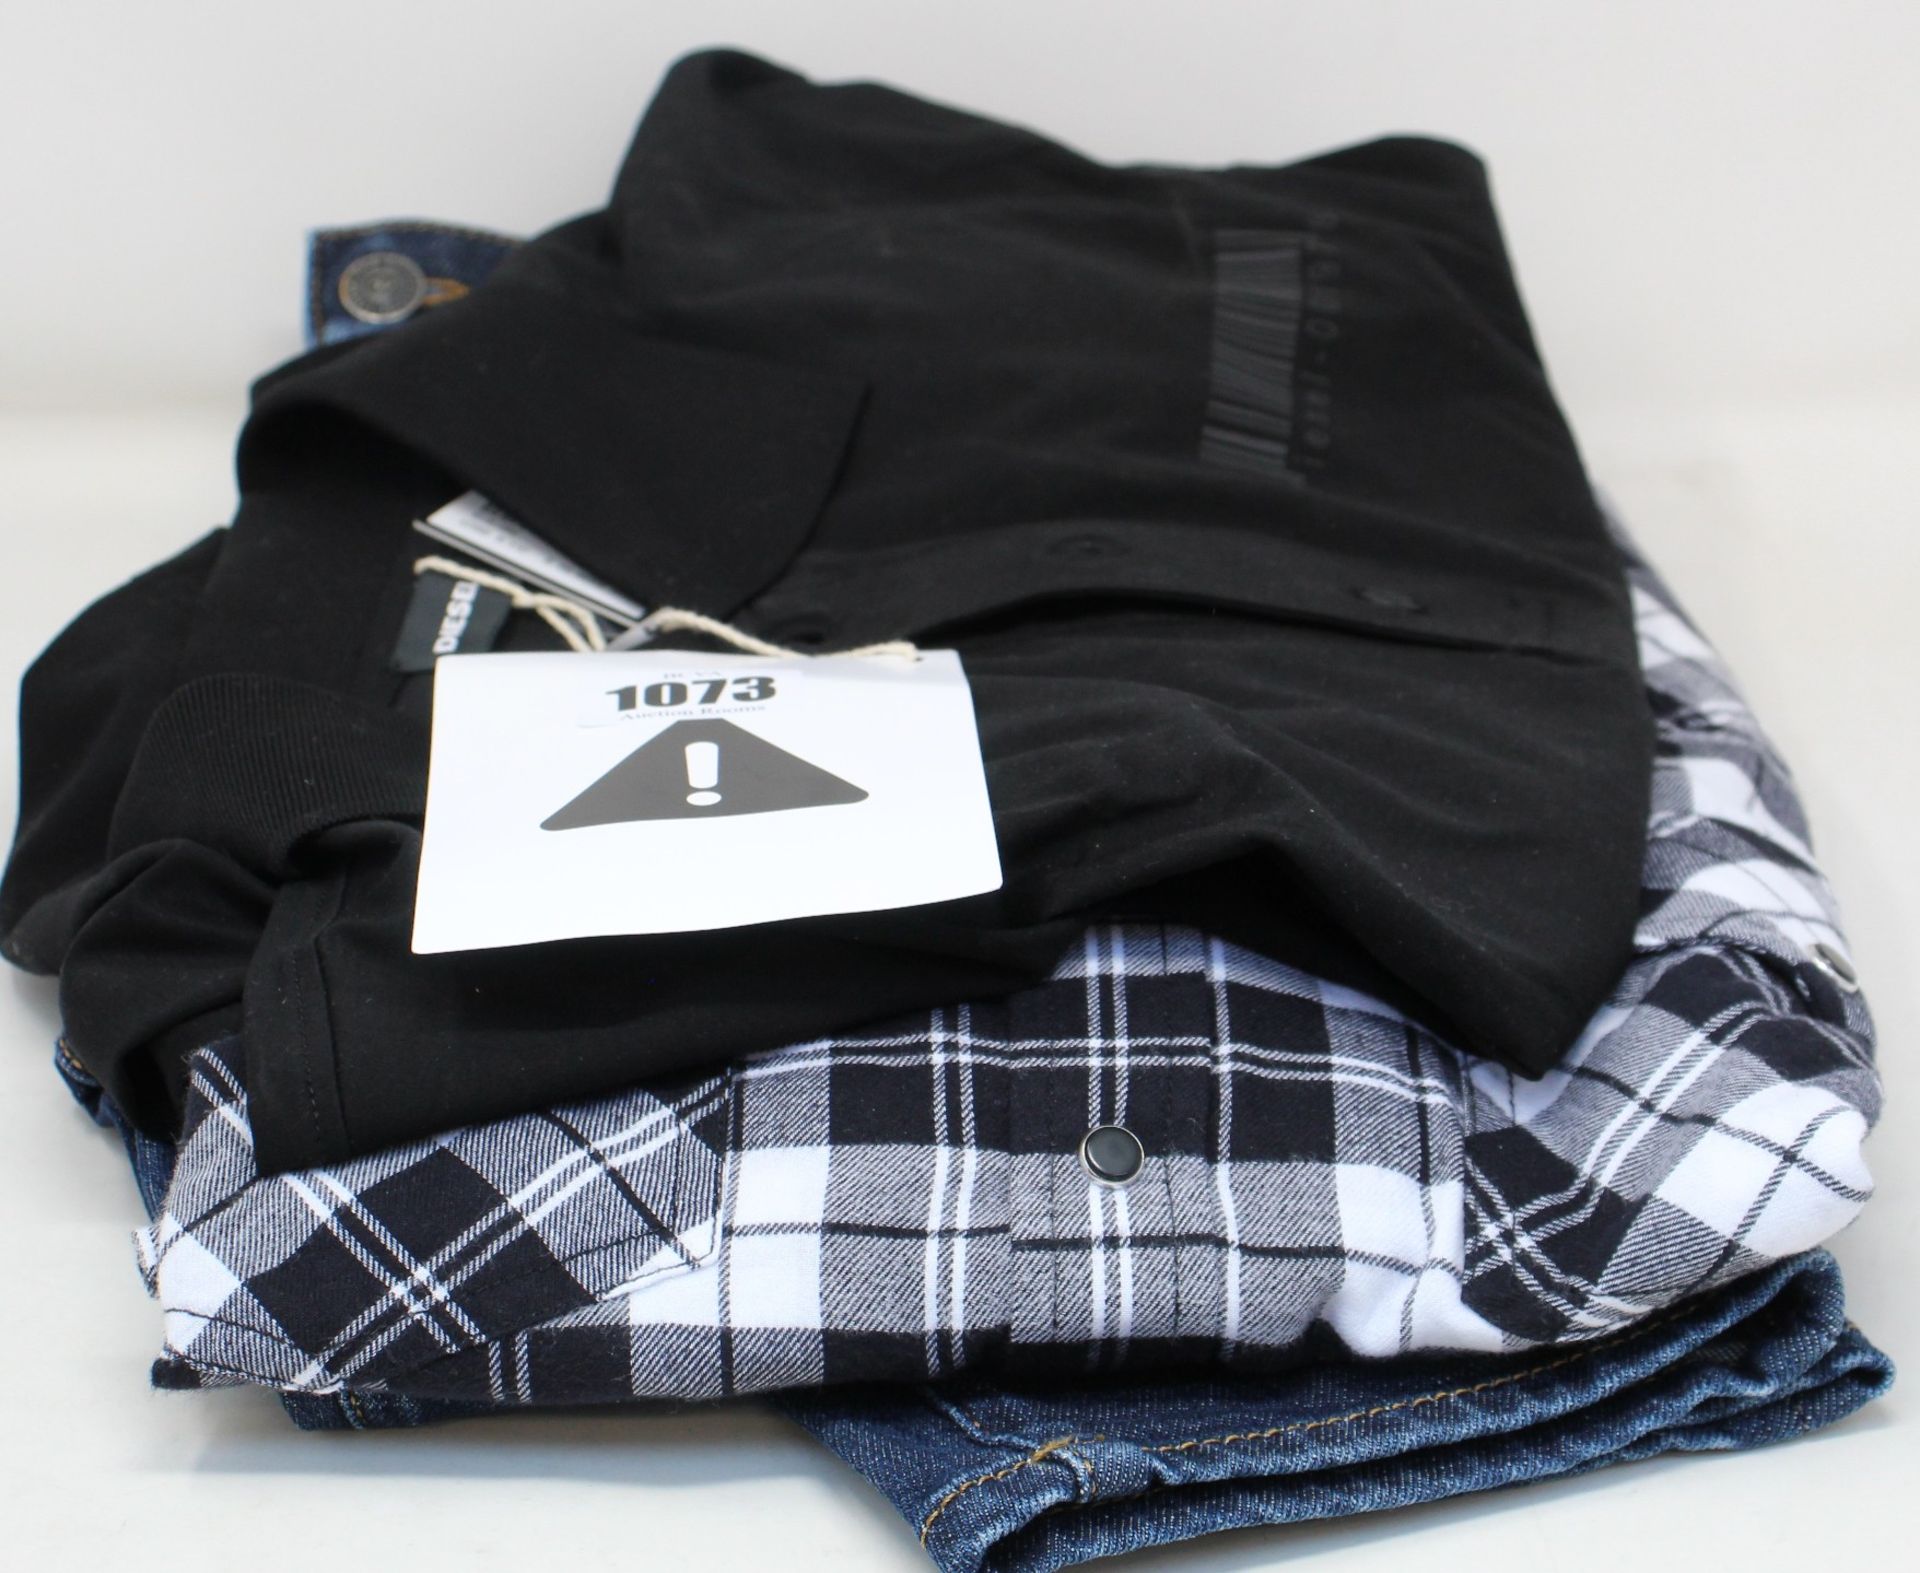 Three items of as new Diesel clothing; a pair of jeans (W30/L32), check shirt (L) and black shirt (M